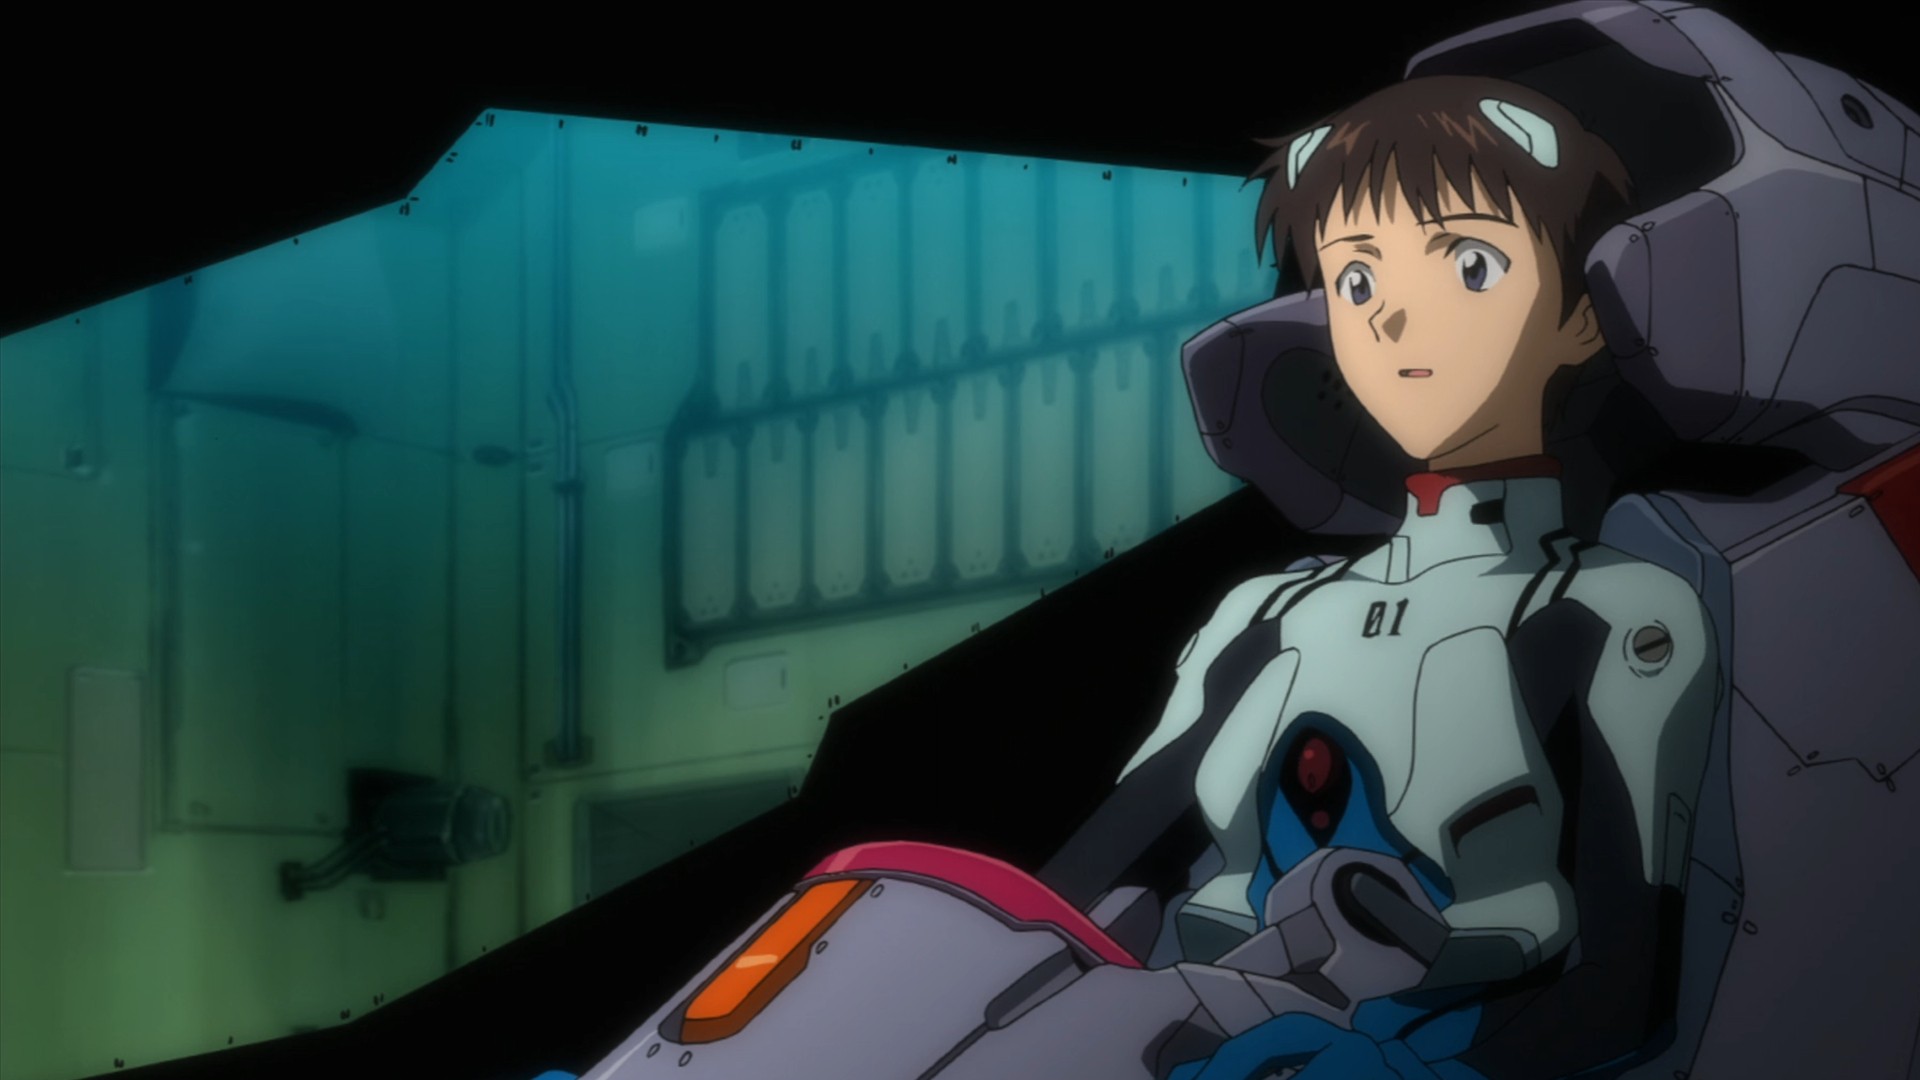 4 - How to watch Evangelion